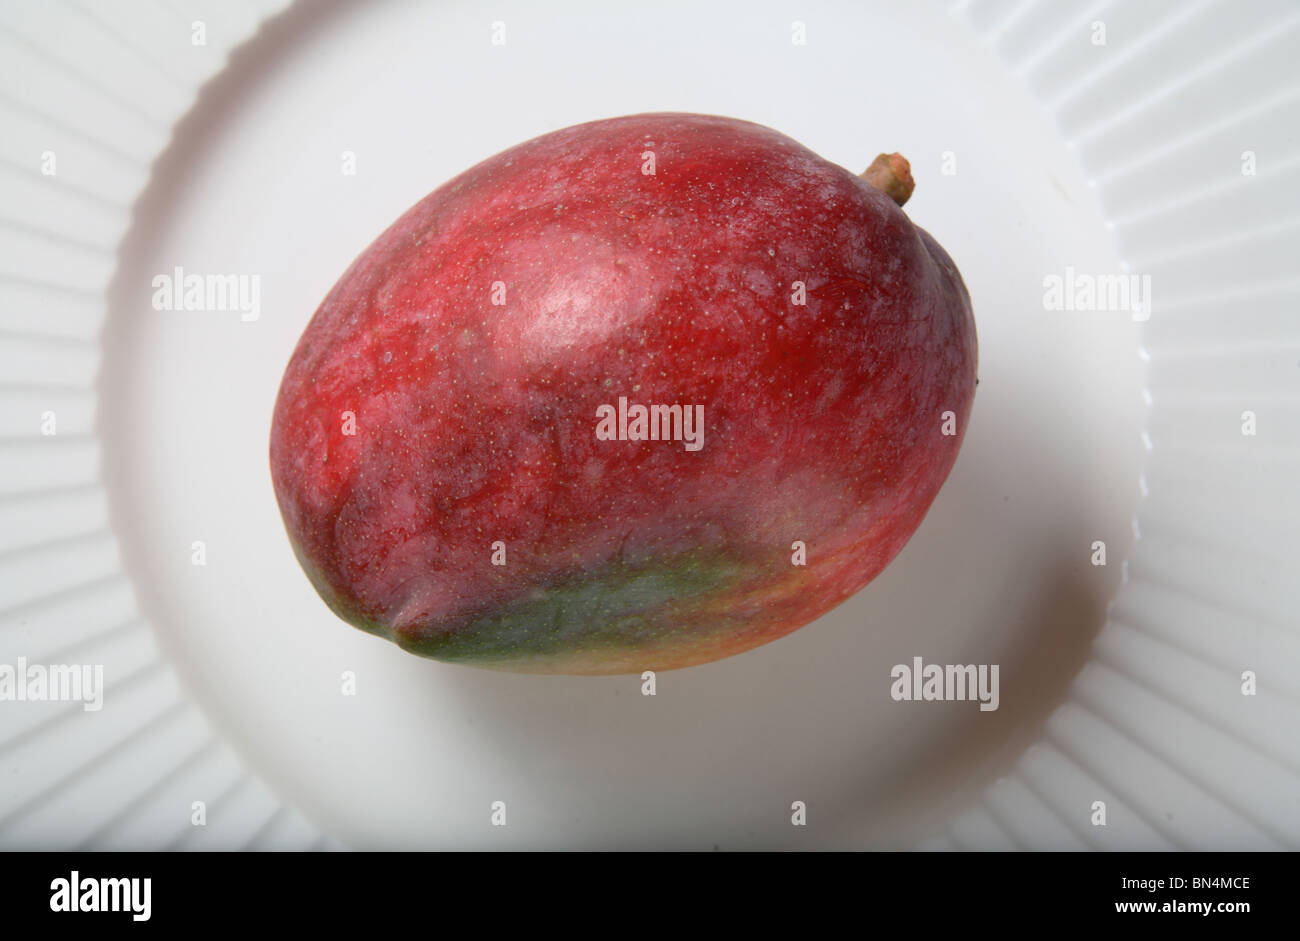 Fruit ; Red Mango ; Sweet ; Sour test ; Colourful ; One mango in a plate ; India Stock Photo